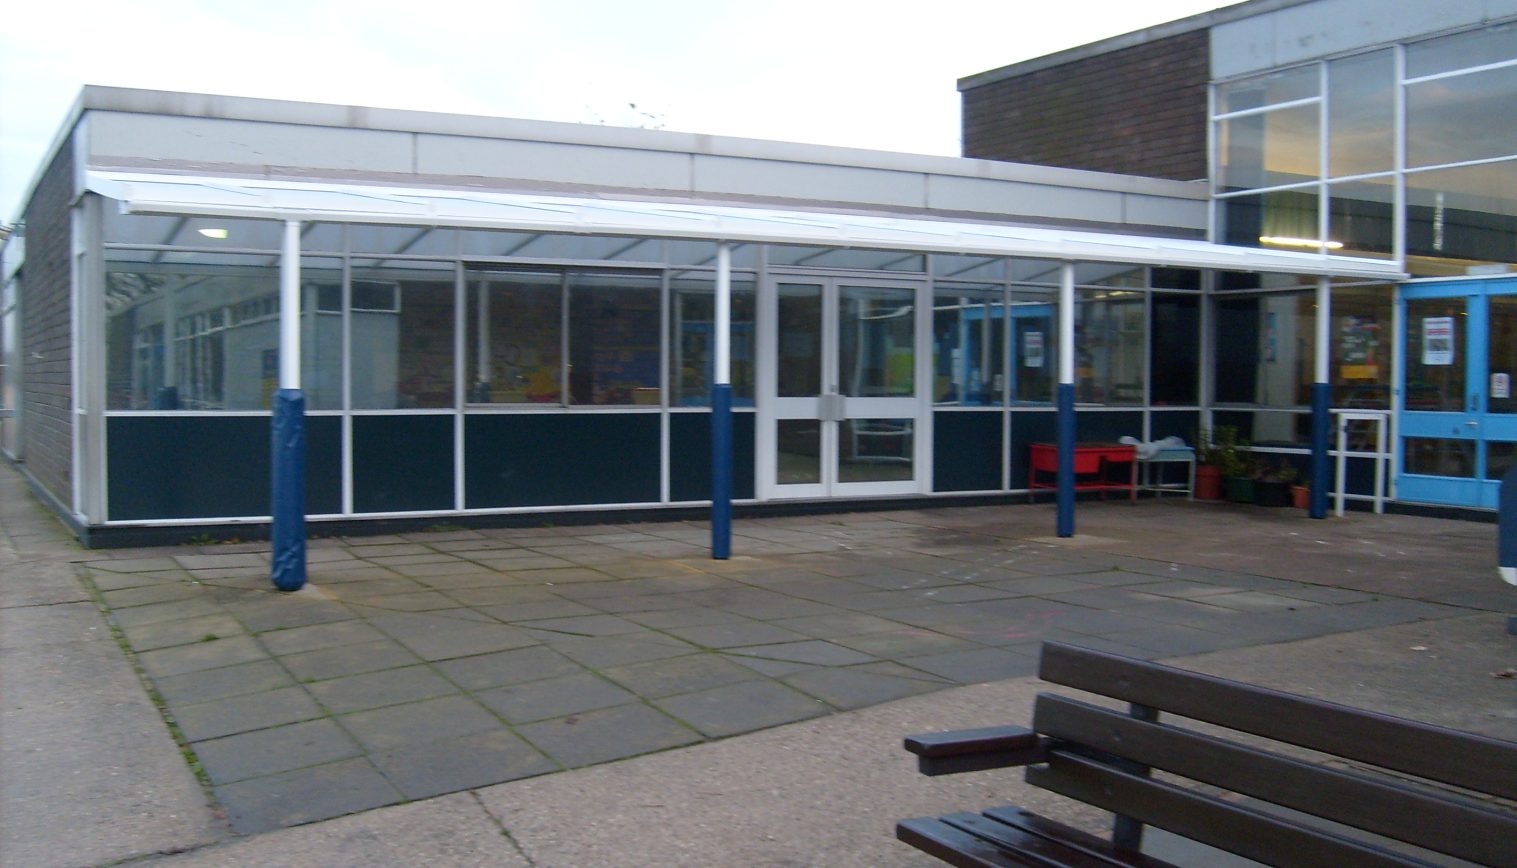 Clements Community Primary School – Second Installation